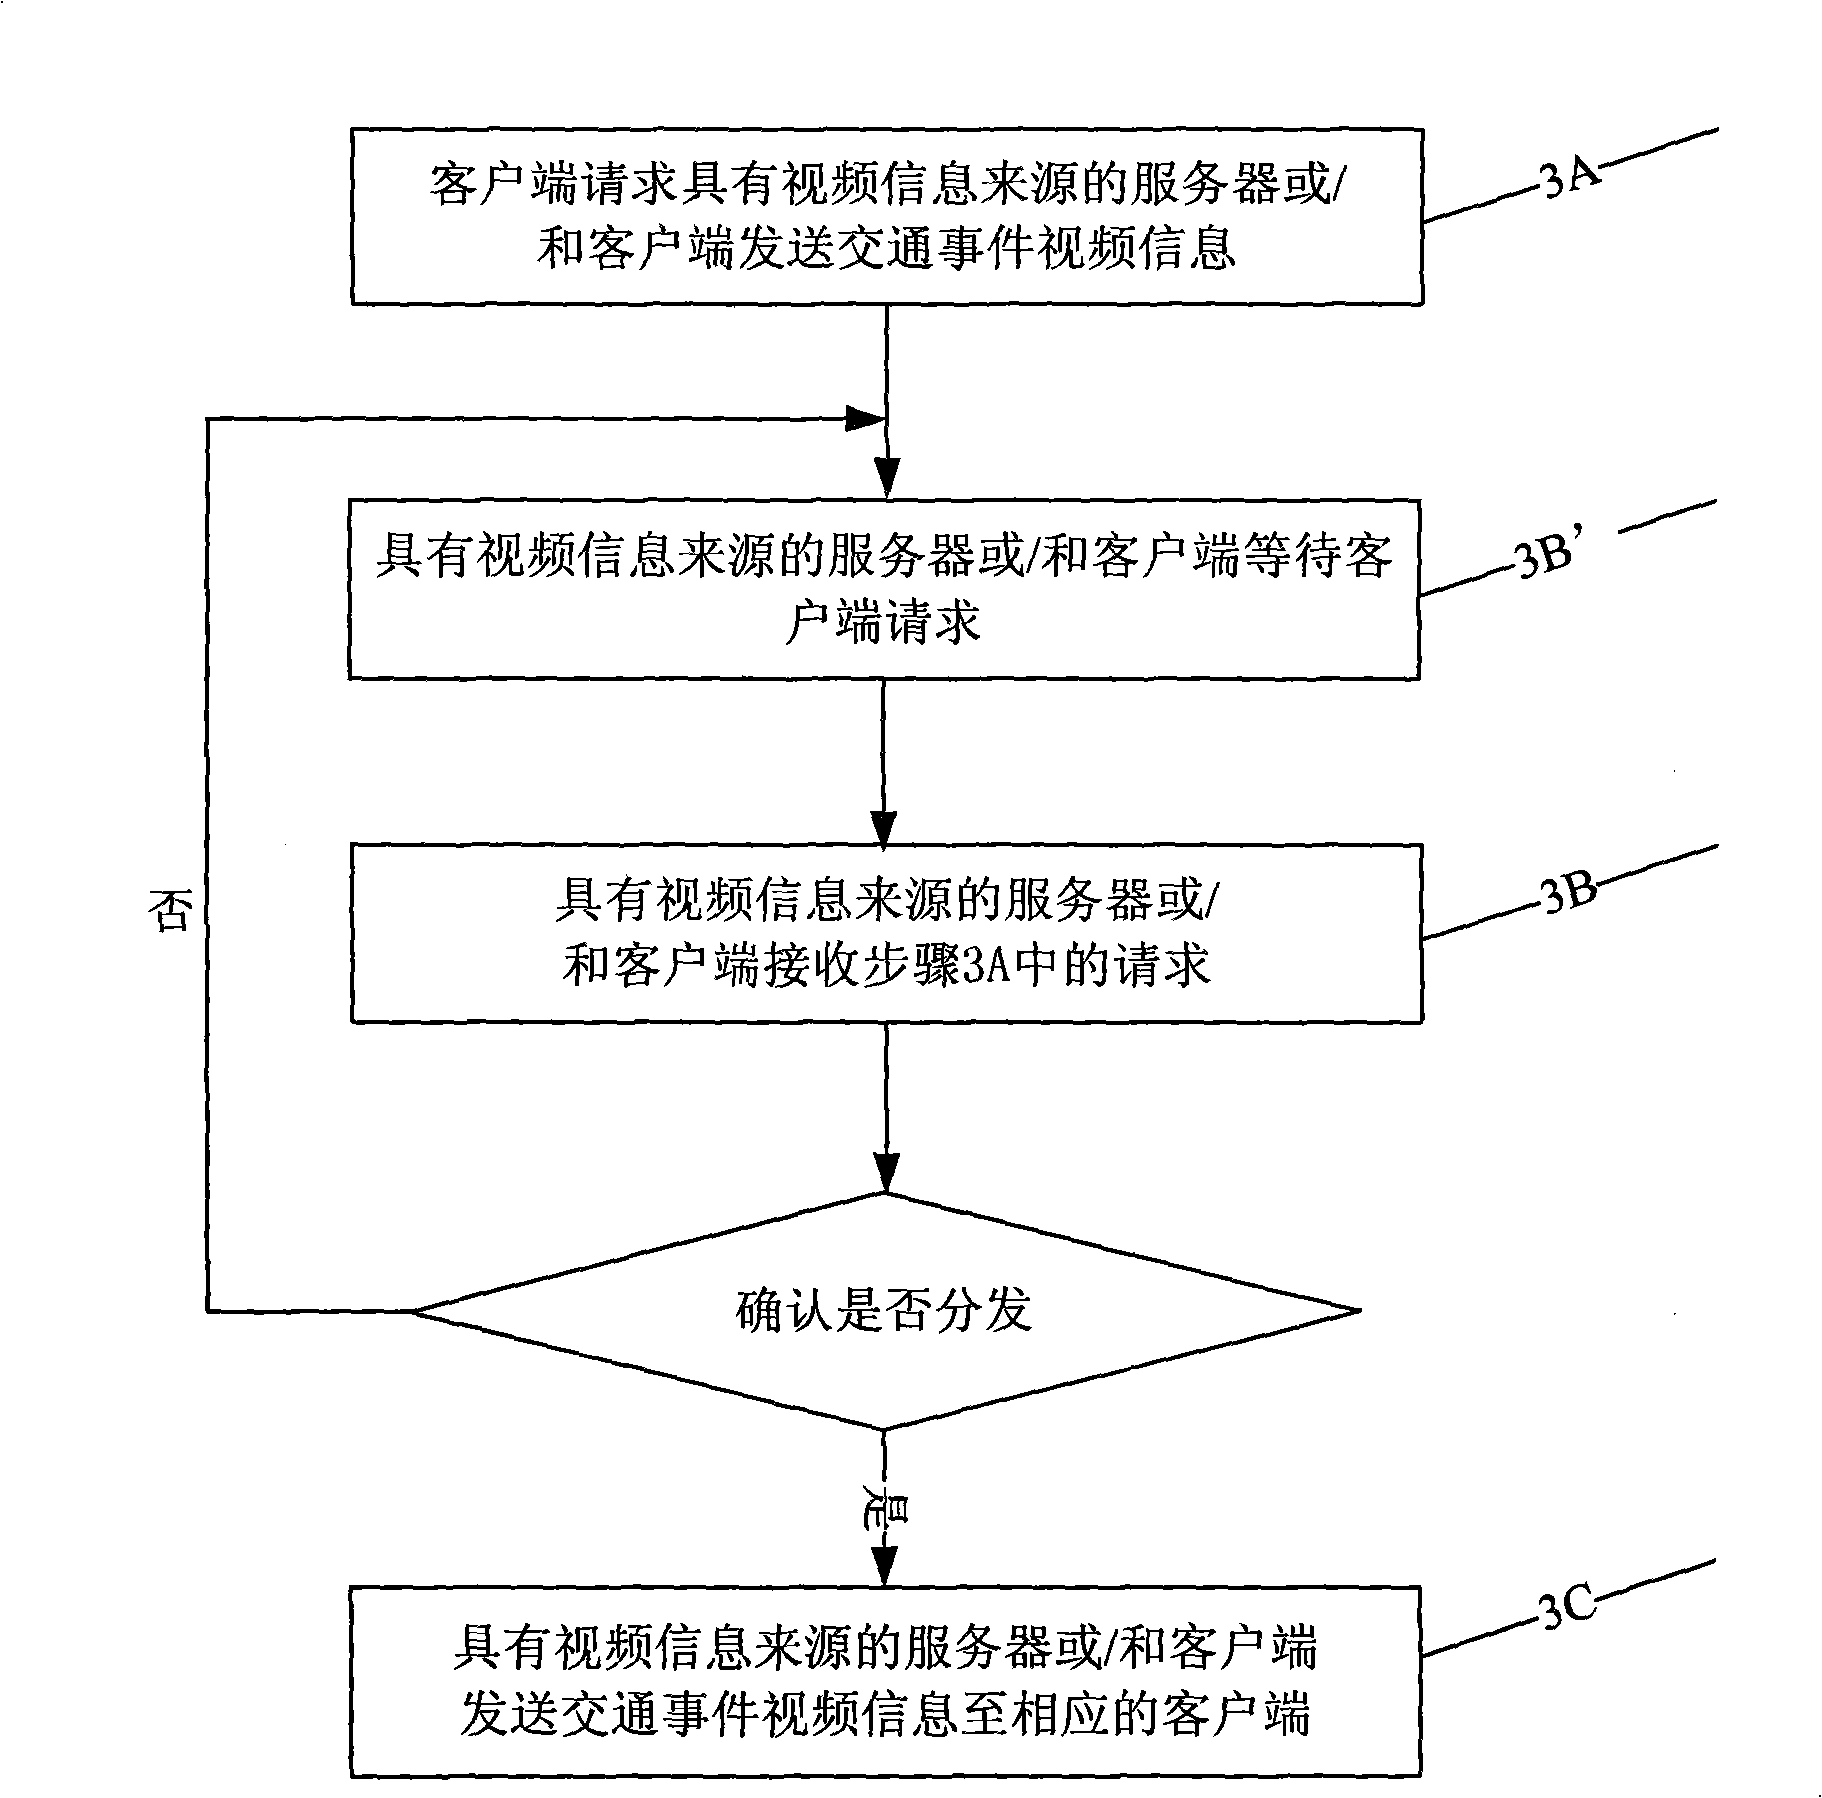 Wireless ad hoc network traffic navigation system and method based on multi-source data